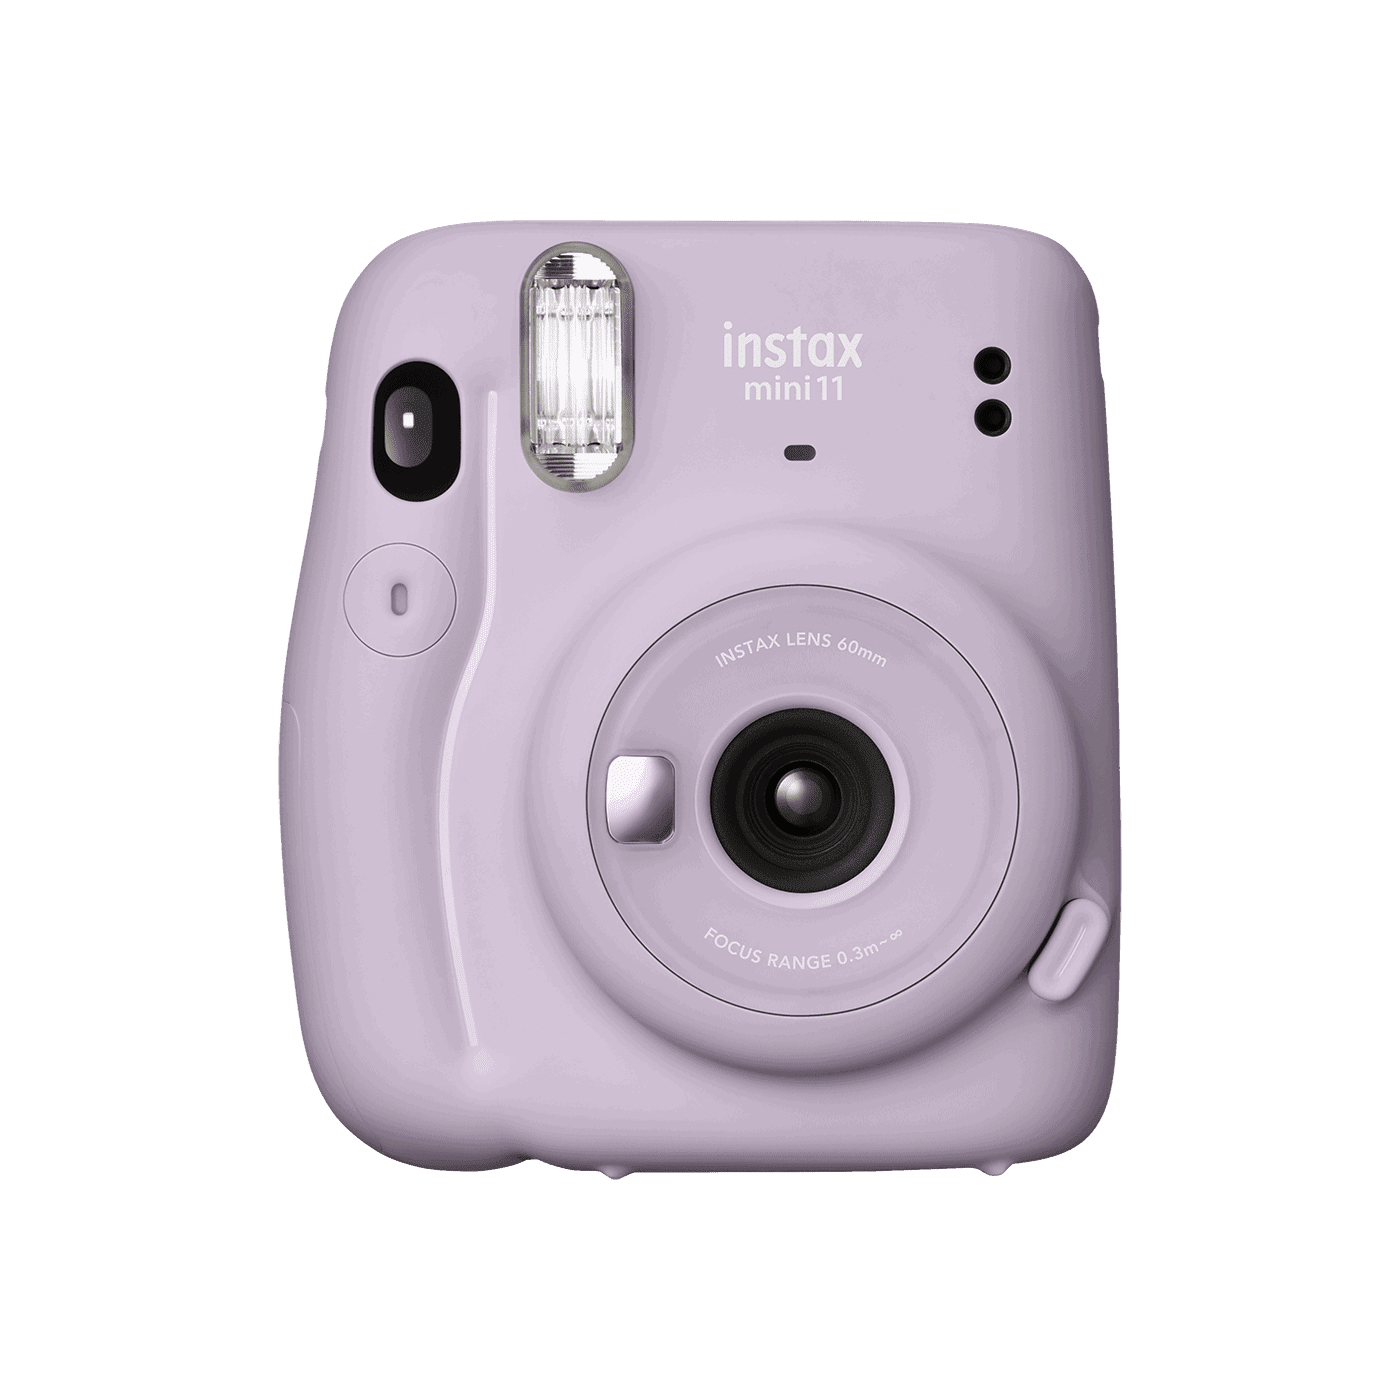 Fujifilm Instax Mini 11 review: the best easy-to-use Instax Mini